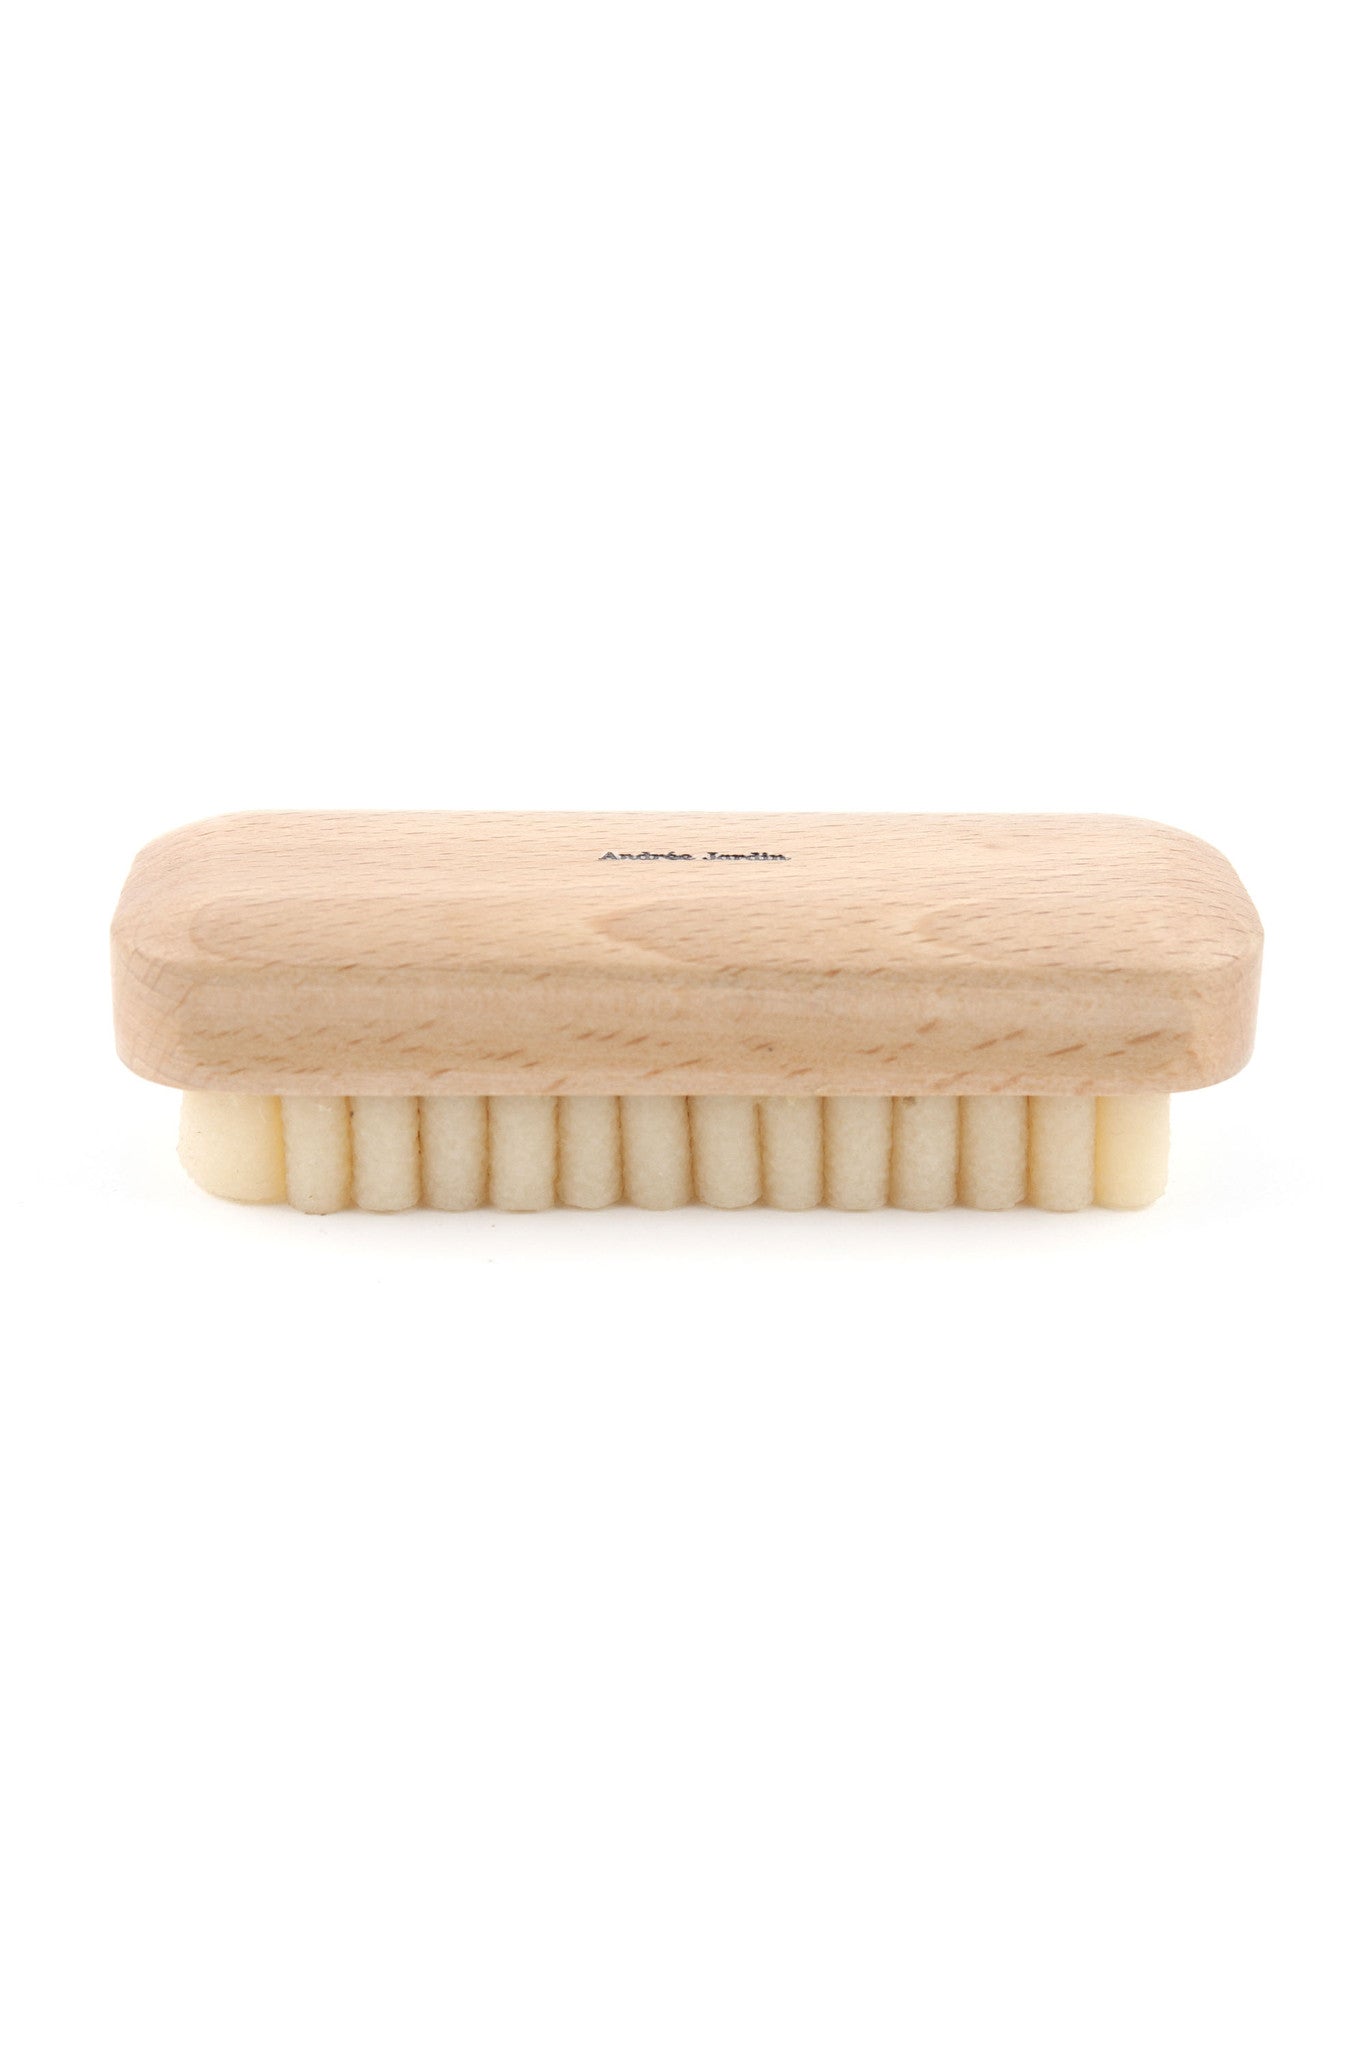 Andrée Jardin Tradition Suede Crepe Brush Utilities Andrée Jardin Andrée Jardin Brand_Andrée Jardin Home_Household Cleaning 5300-1917_Suede_Brush_I